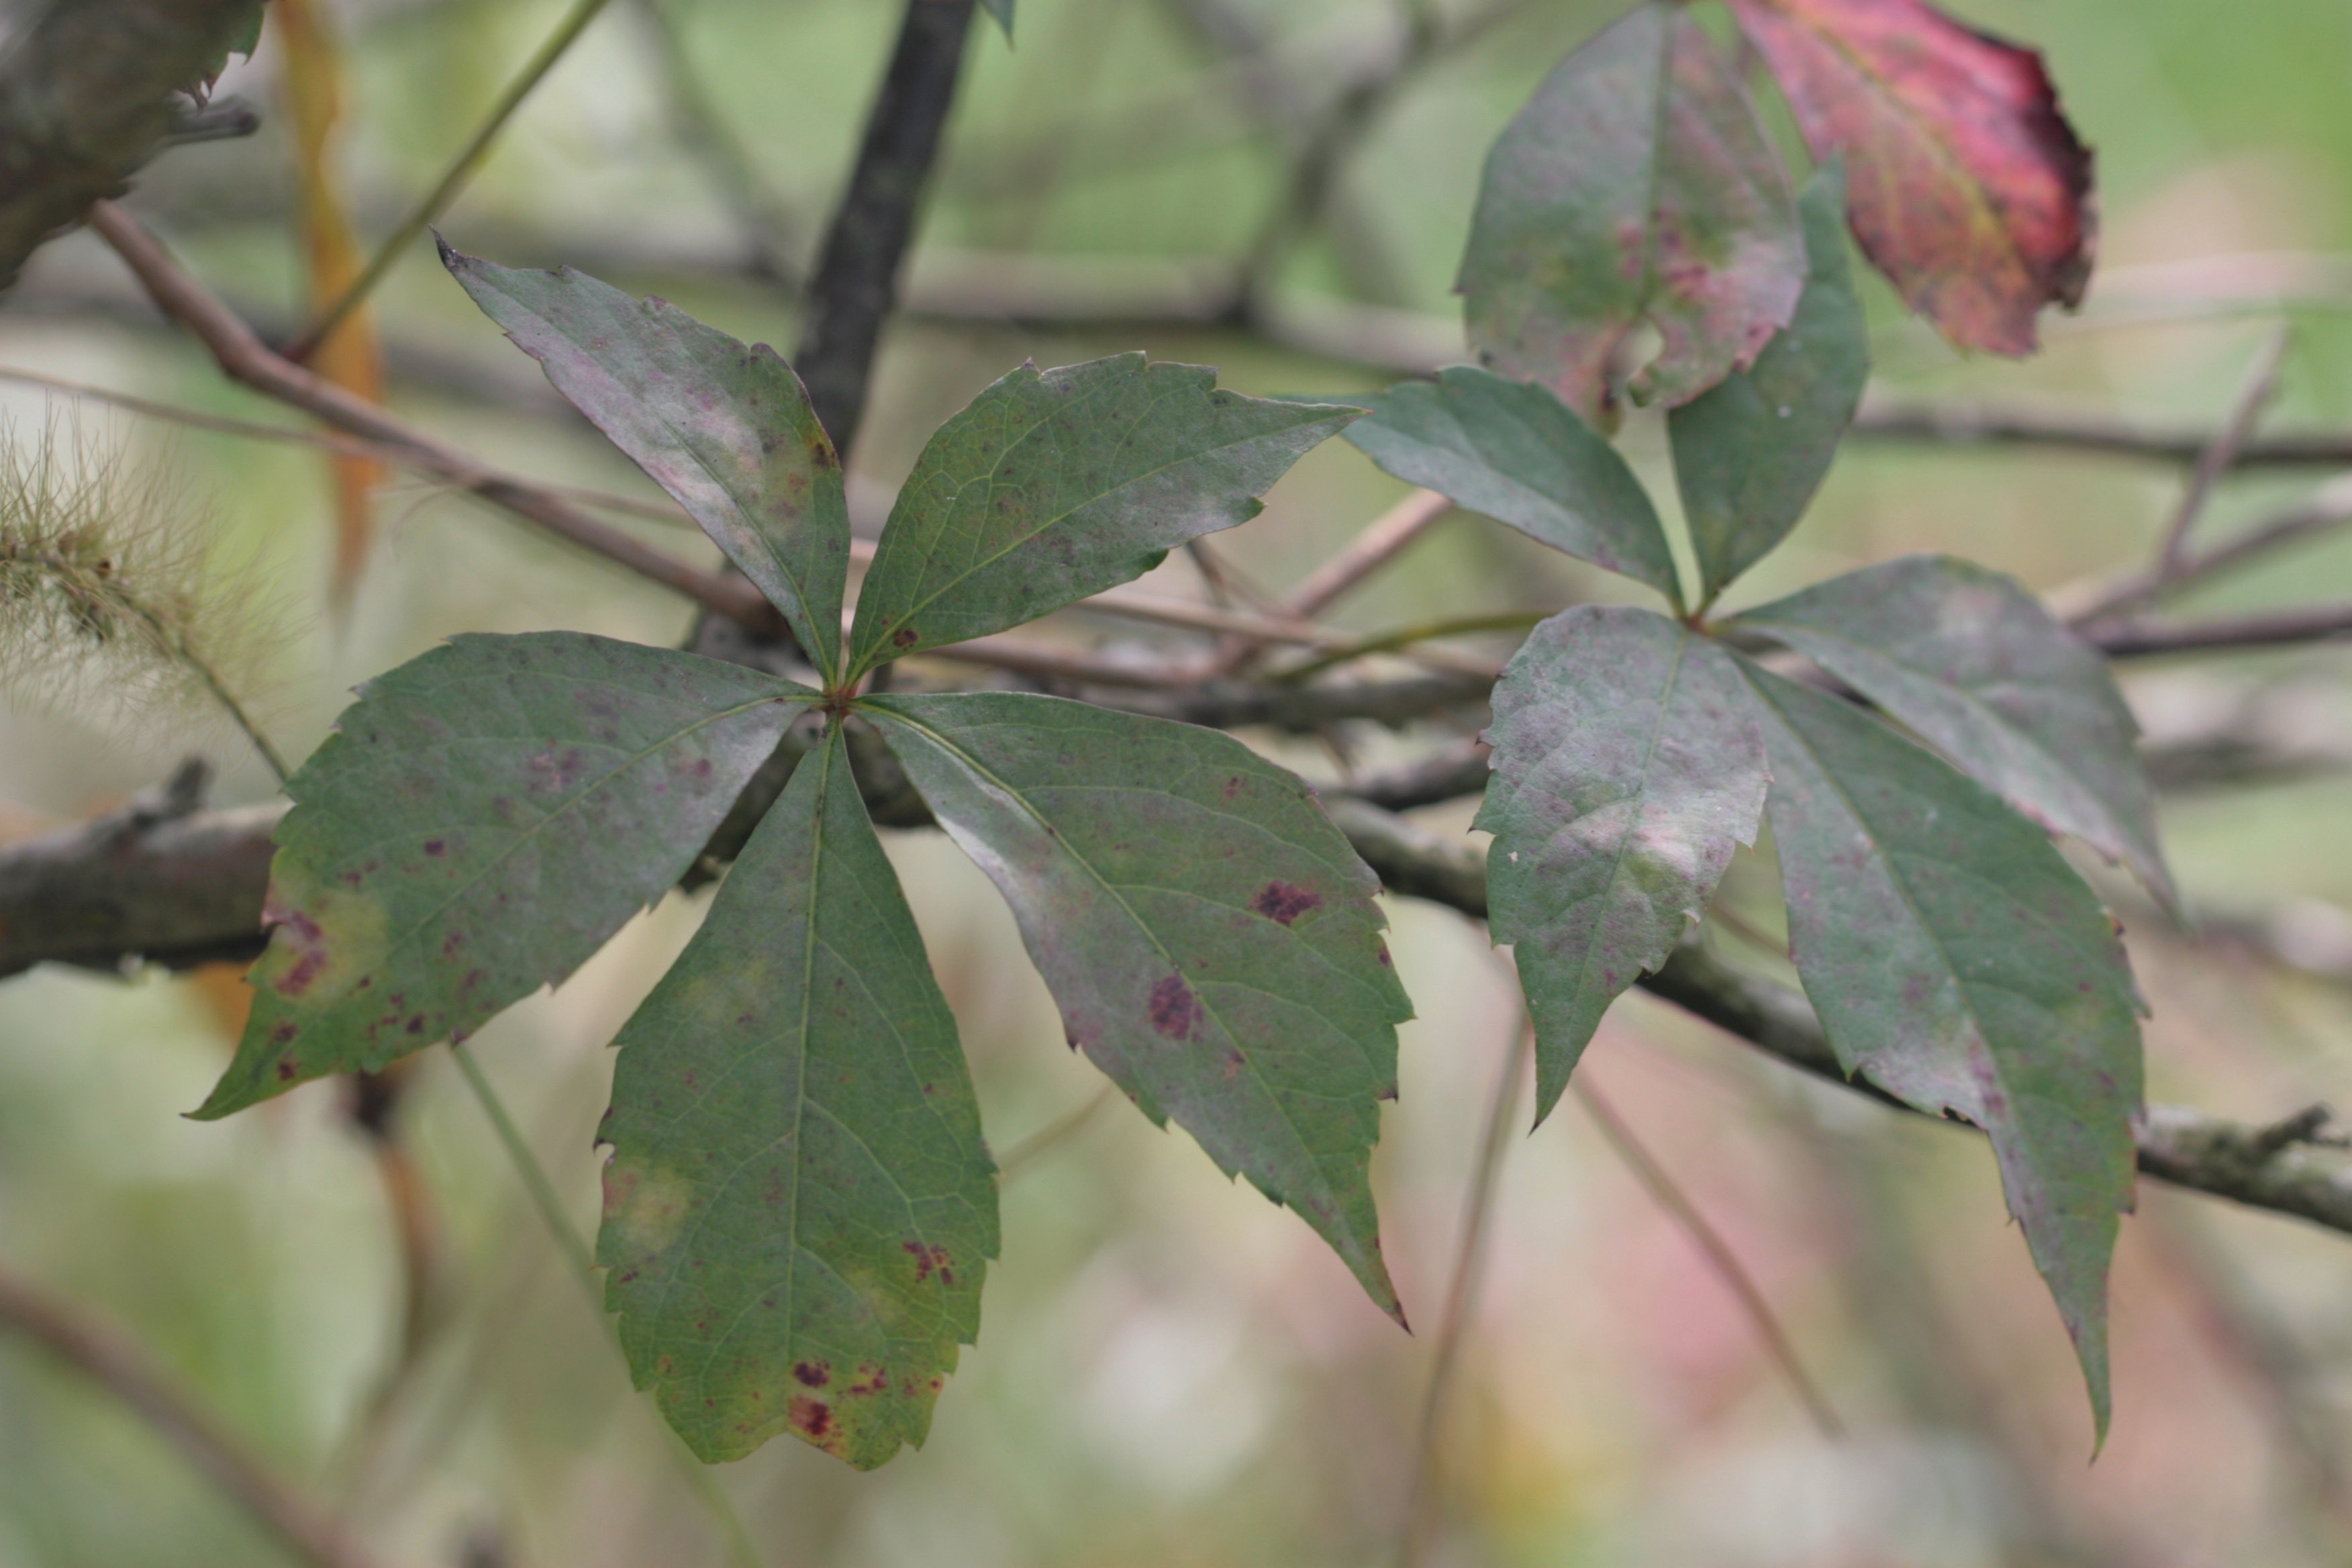 The Scientific Name is Parthenocissus quinquefolia. You will likely hear them called Virginia Creeper. This picture shows the Woody vine with palmately compound leaf of five leaflets of Parthenocissus quinquefolia